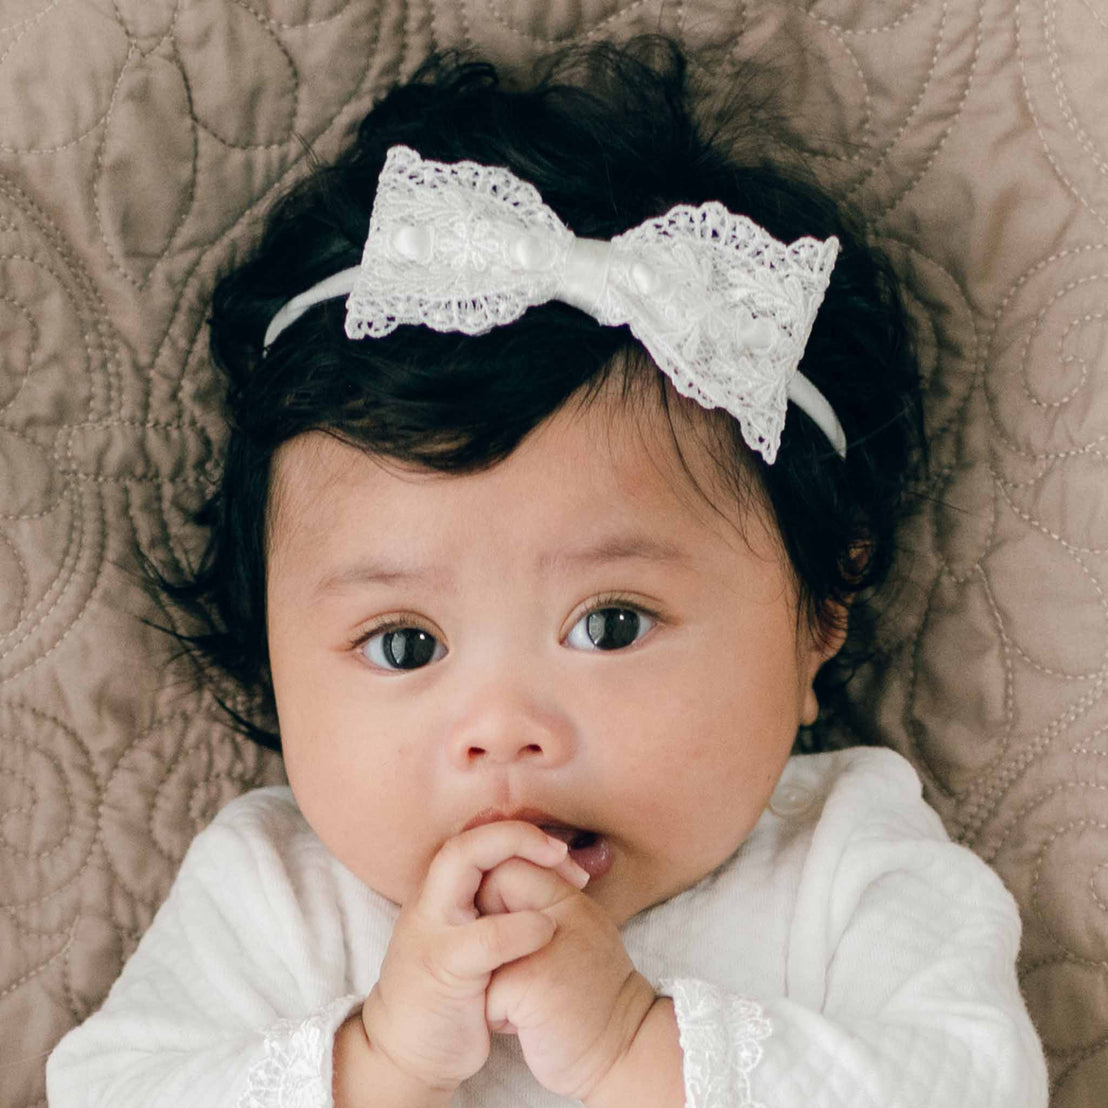 An infant with black hair wearing a Madeline Lace Bow Headband and a long-sleeved white outfit is lying on a quilted surface. The baby has their hands near their mouth and is looking directly at the camera.